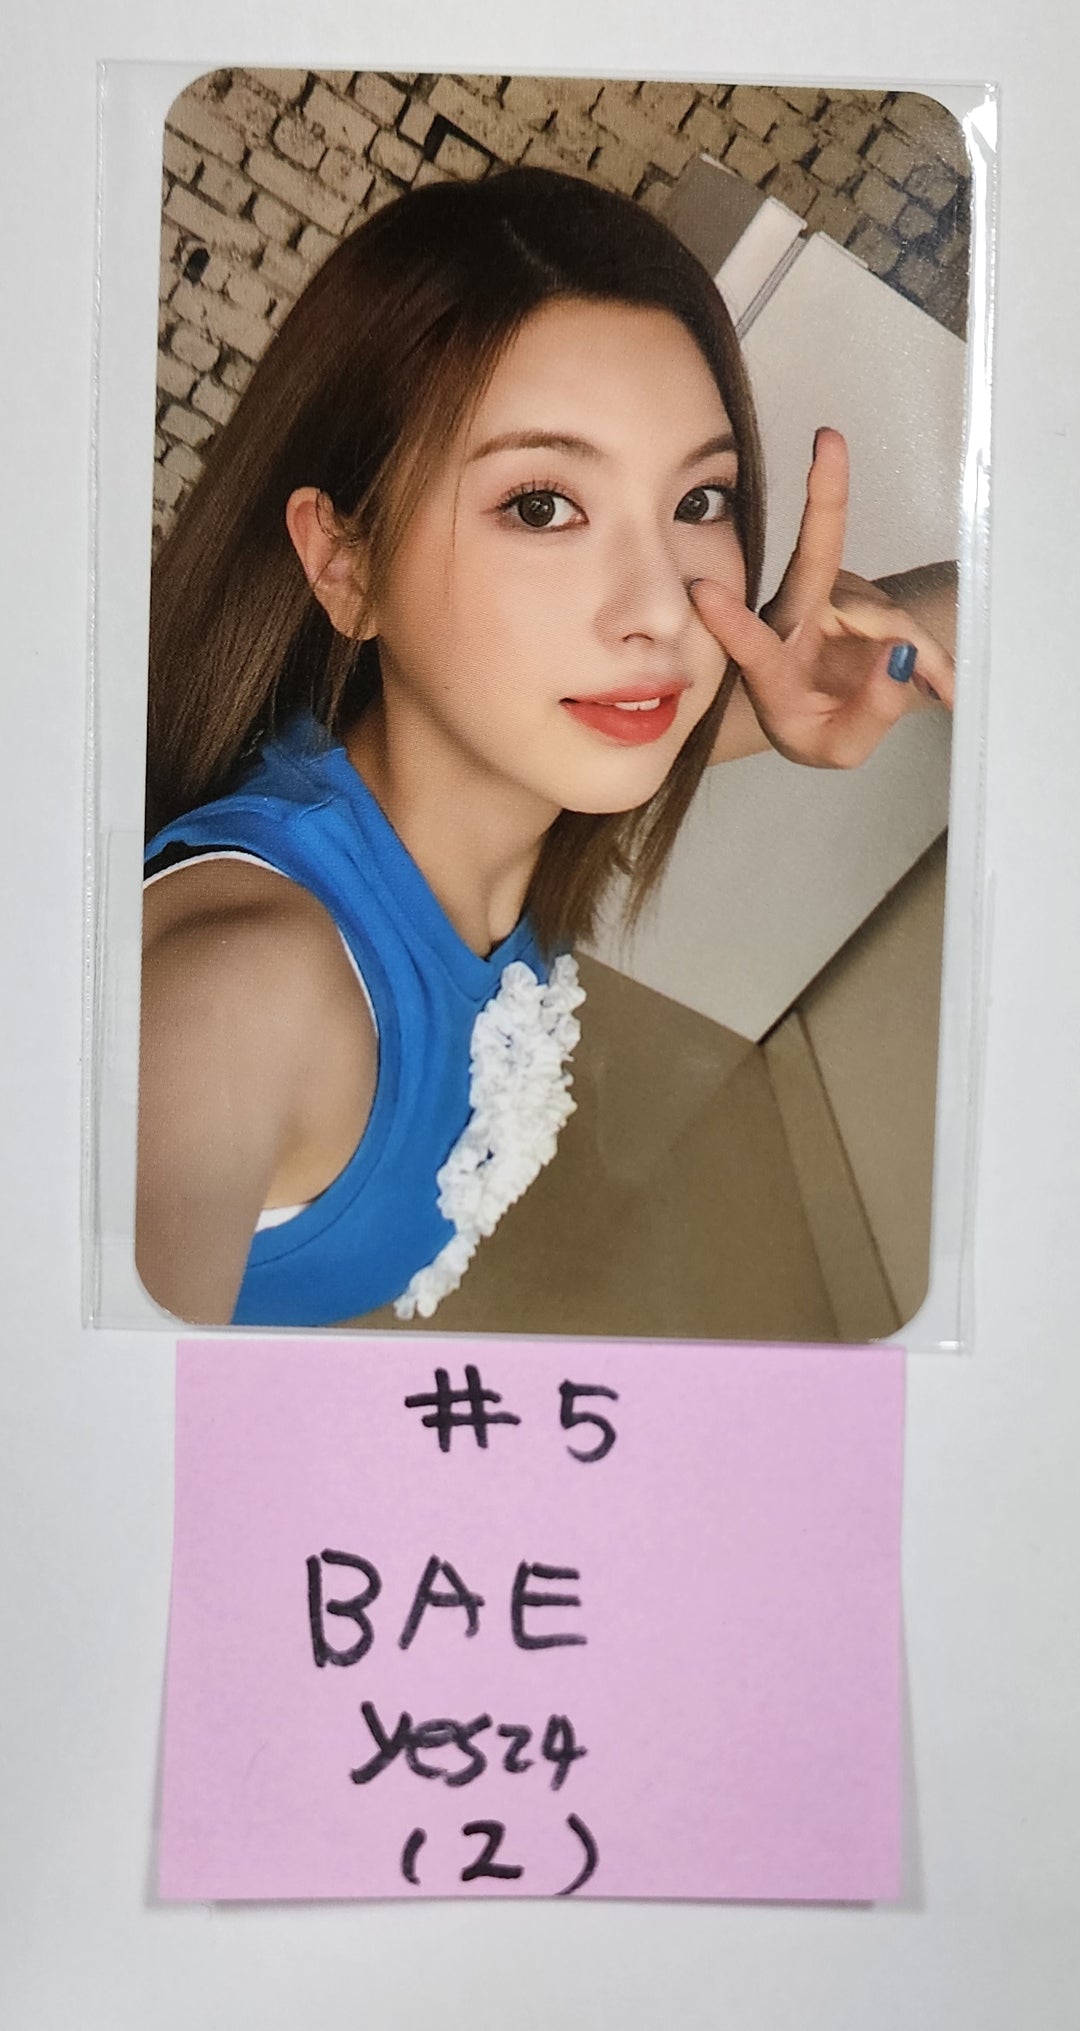 NMIXX 'ENTWURF' - Yes24 Pre-Order Benefit Photocard